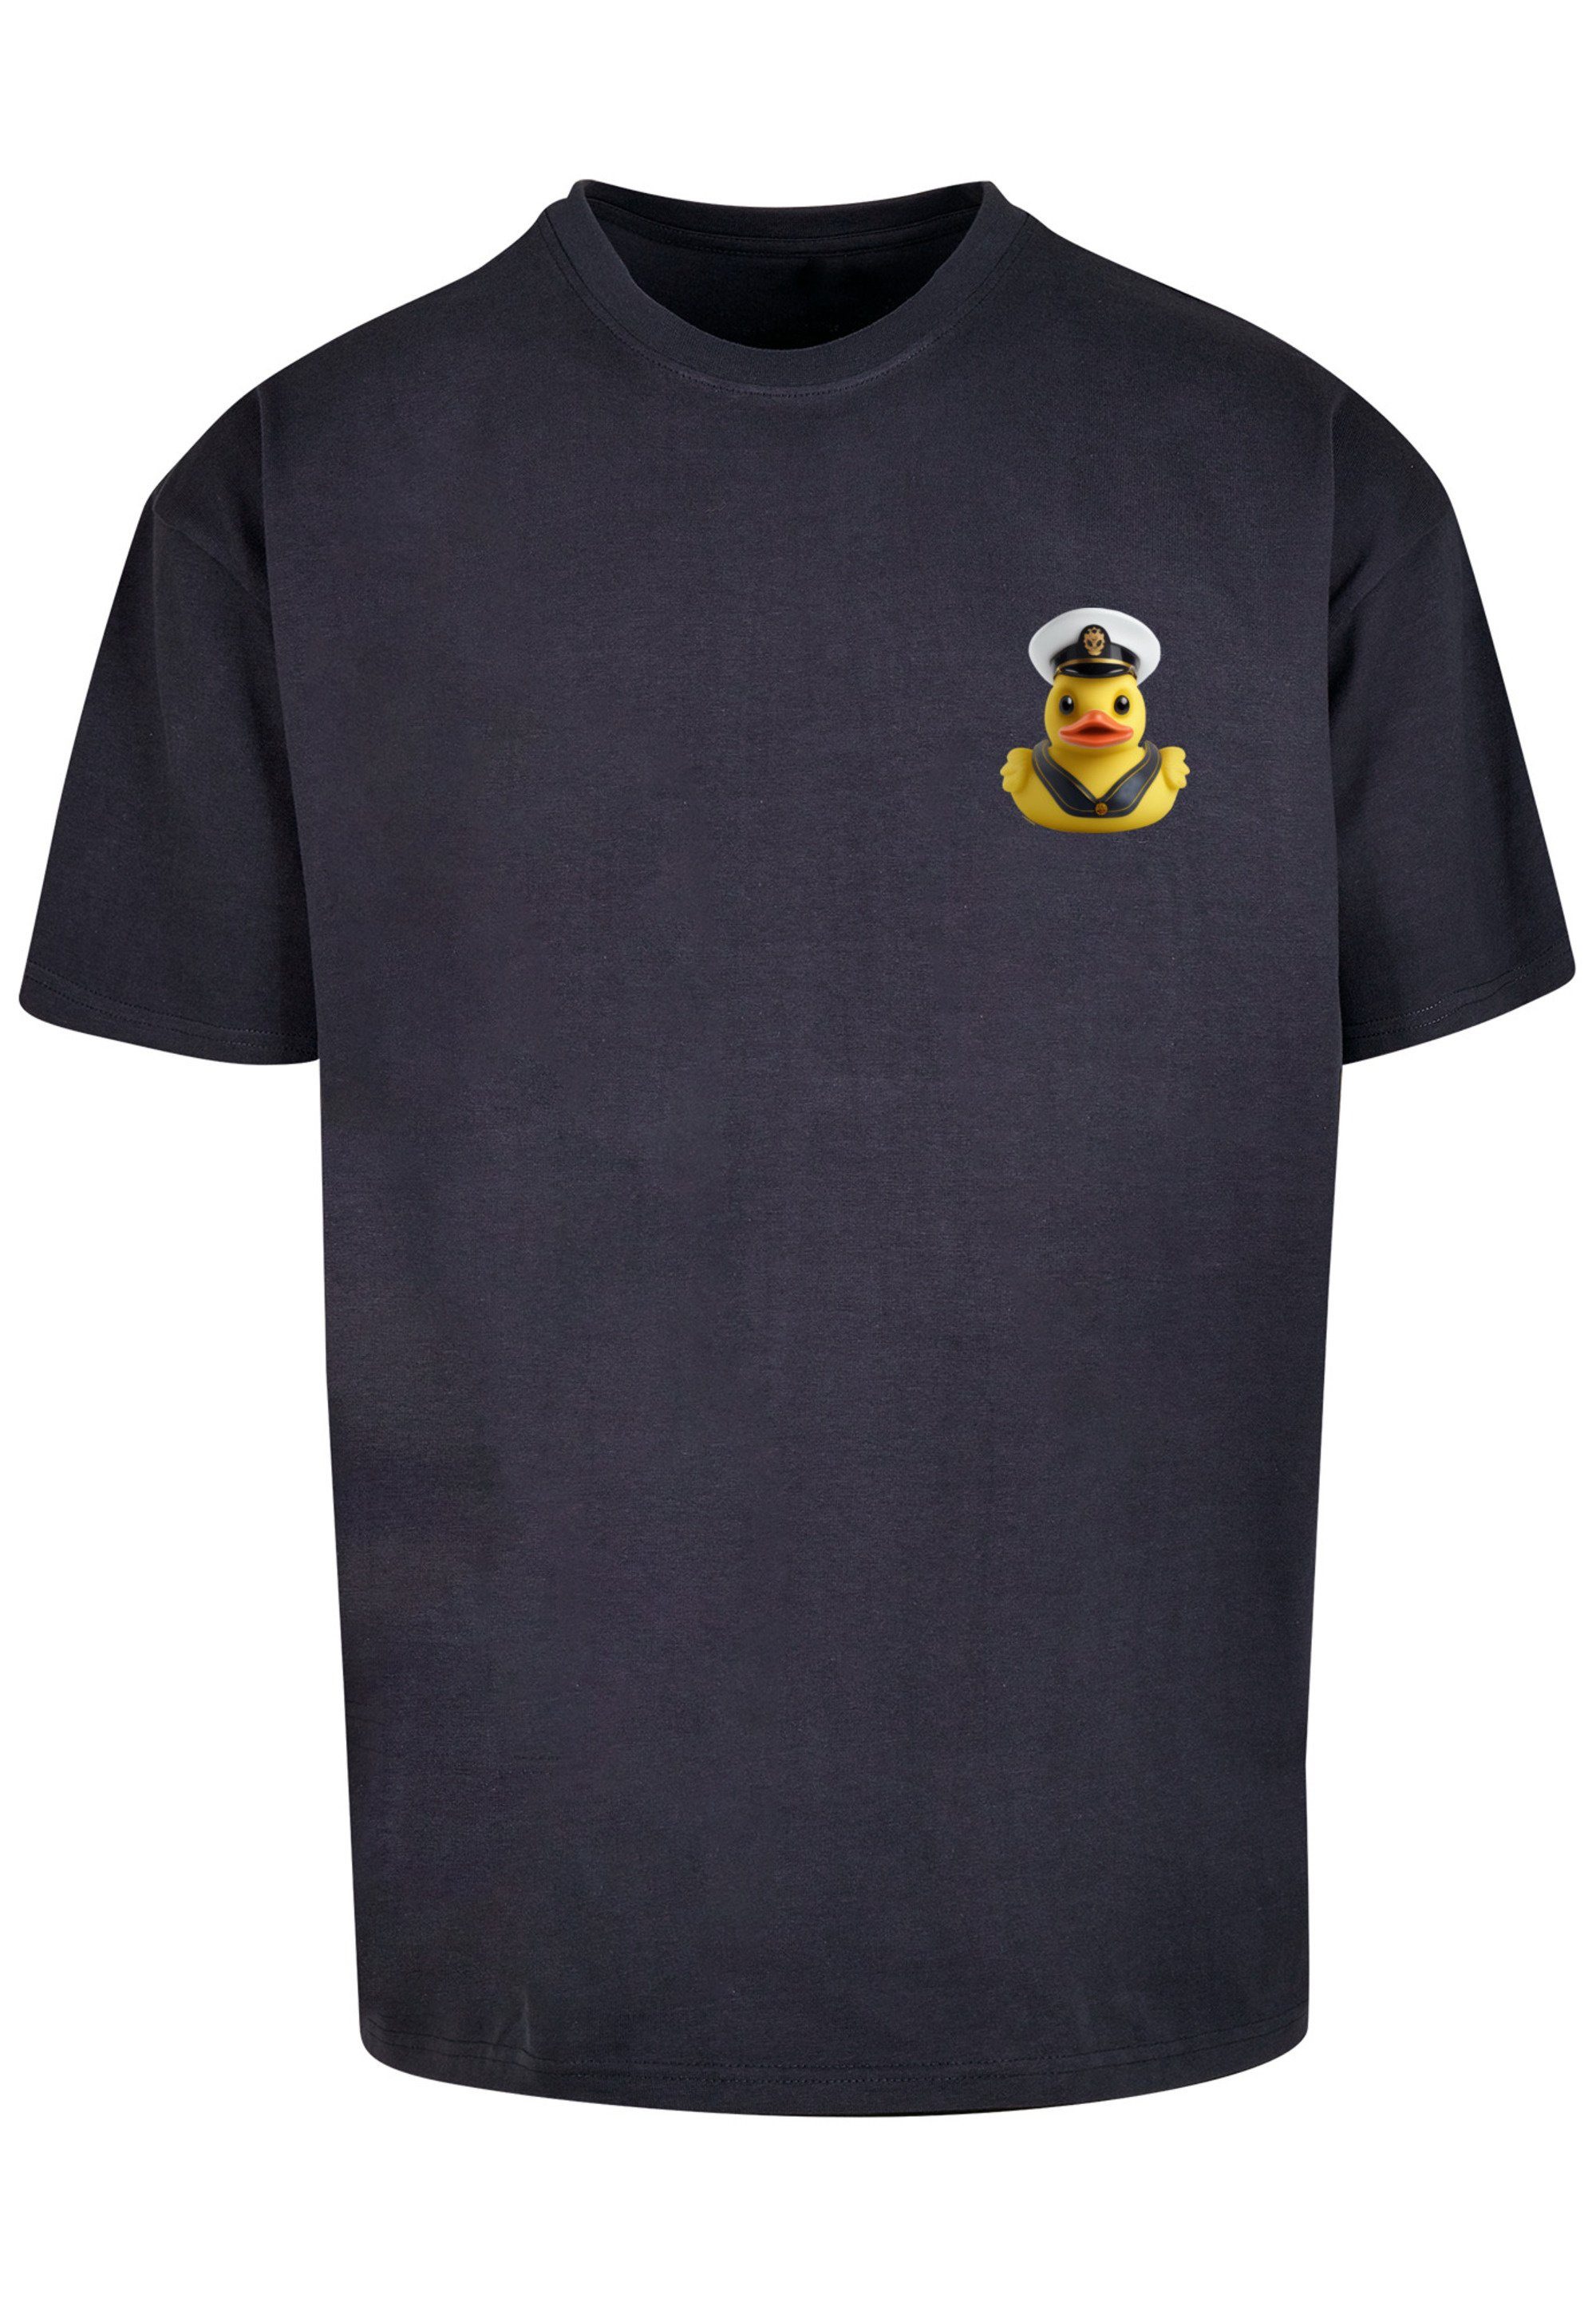 Print T-Shirt Duck Rubber TEE navy OVERSIZE F4NT4STIC Captain